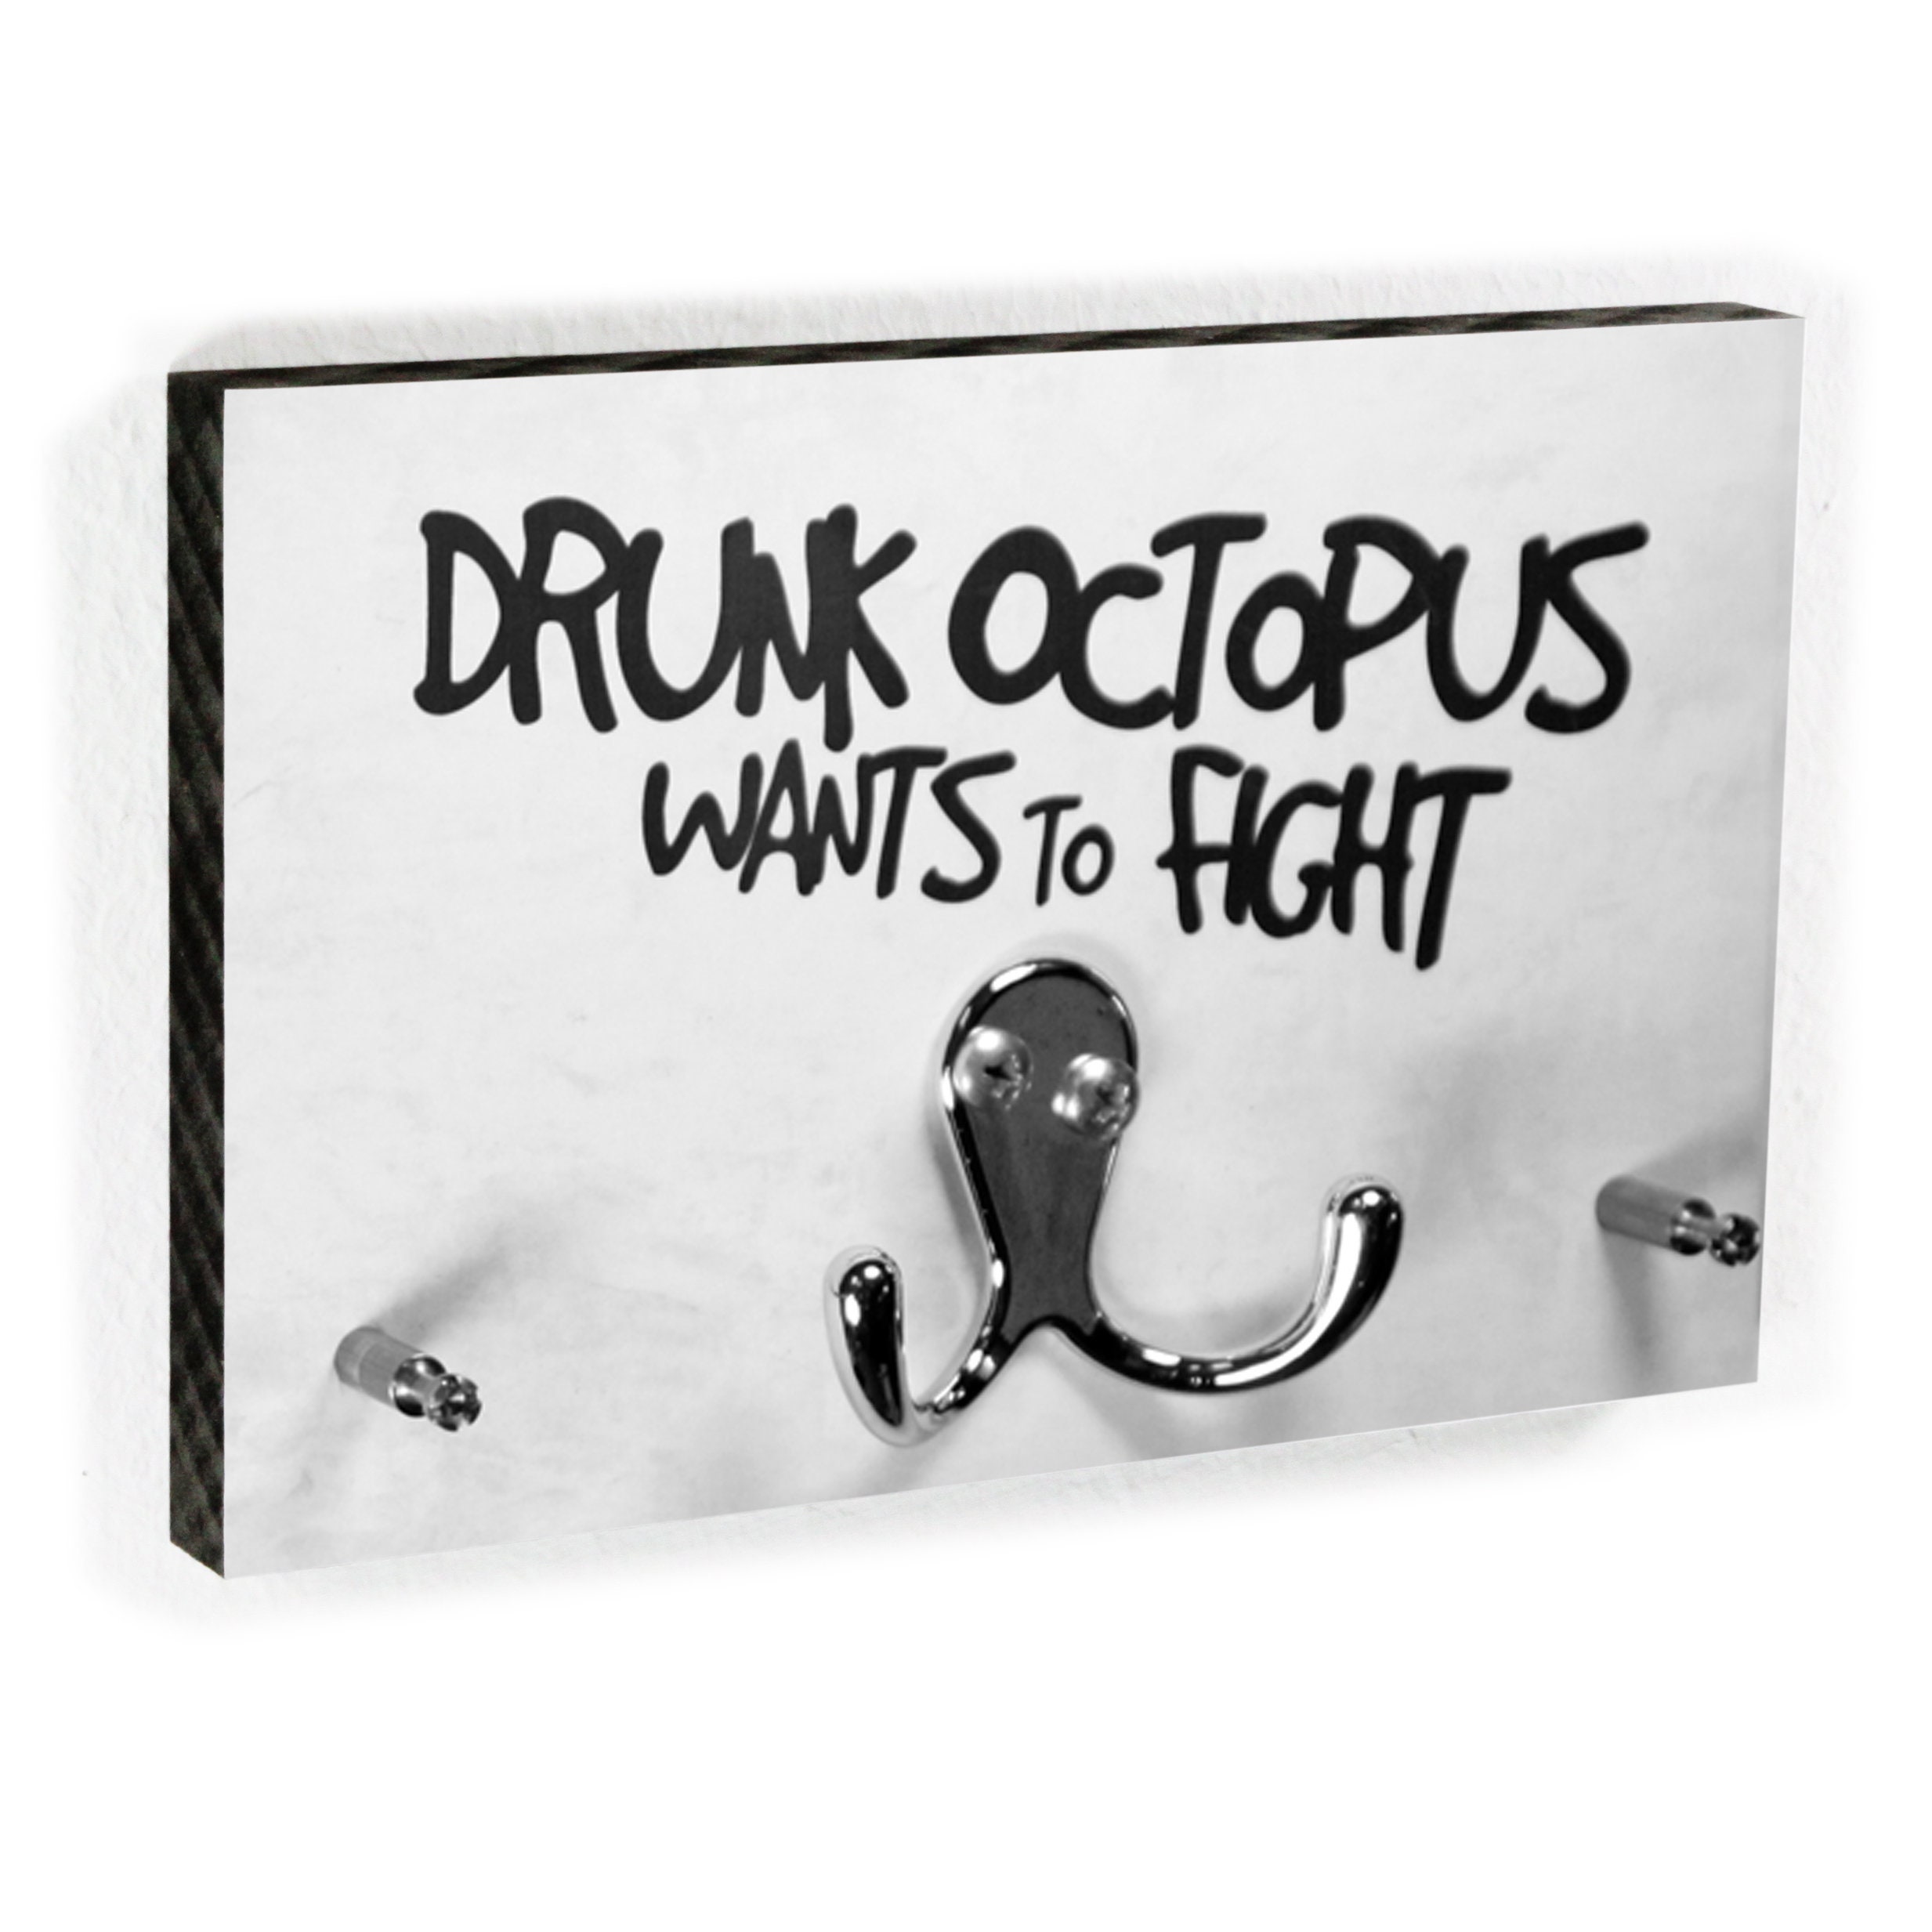 Key Board Drunk Octopus Wants to Fight Funny Hook Bar 4 Keys the Slightly  Different Move-in Gift for a Cool Hallway -  Ireland